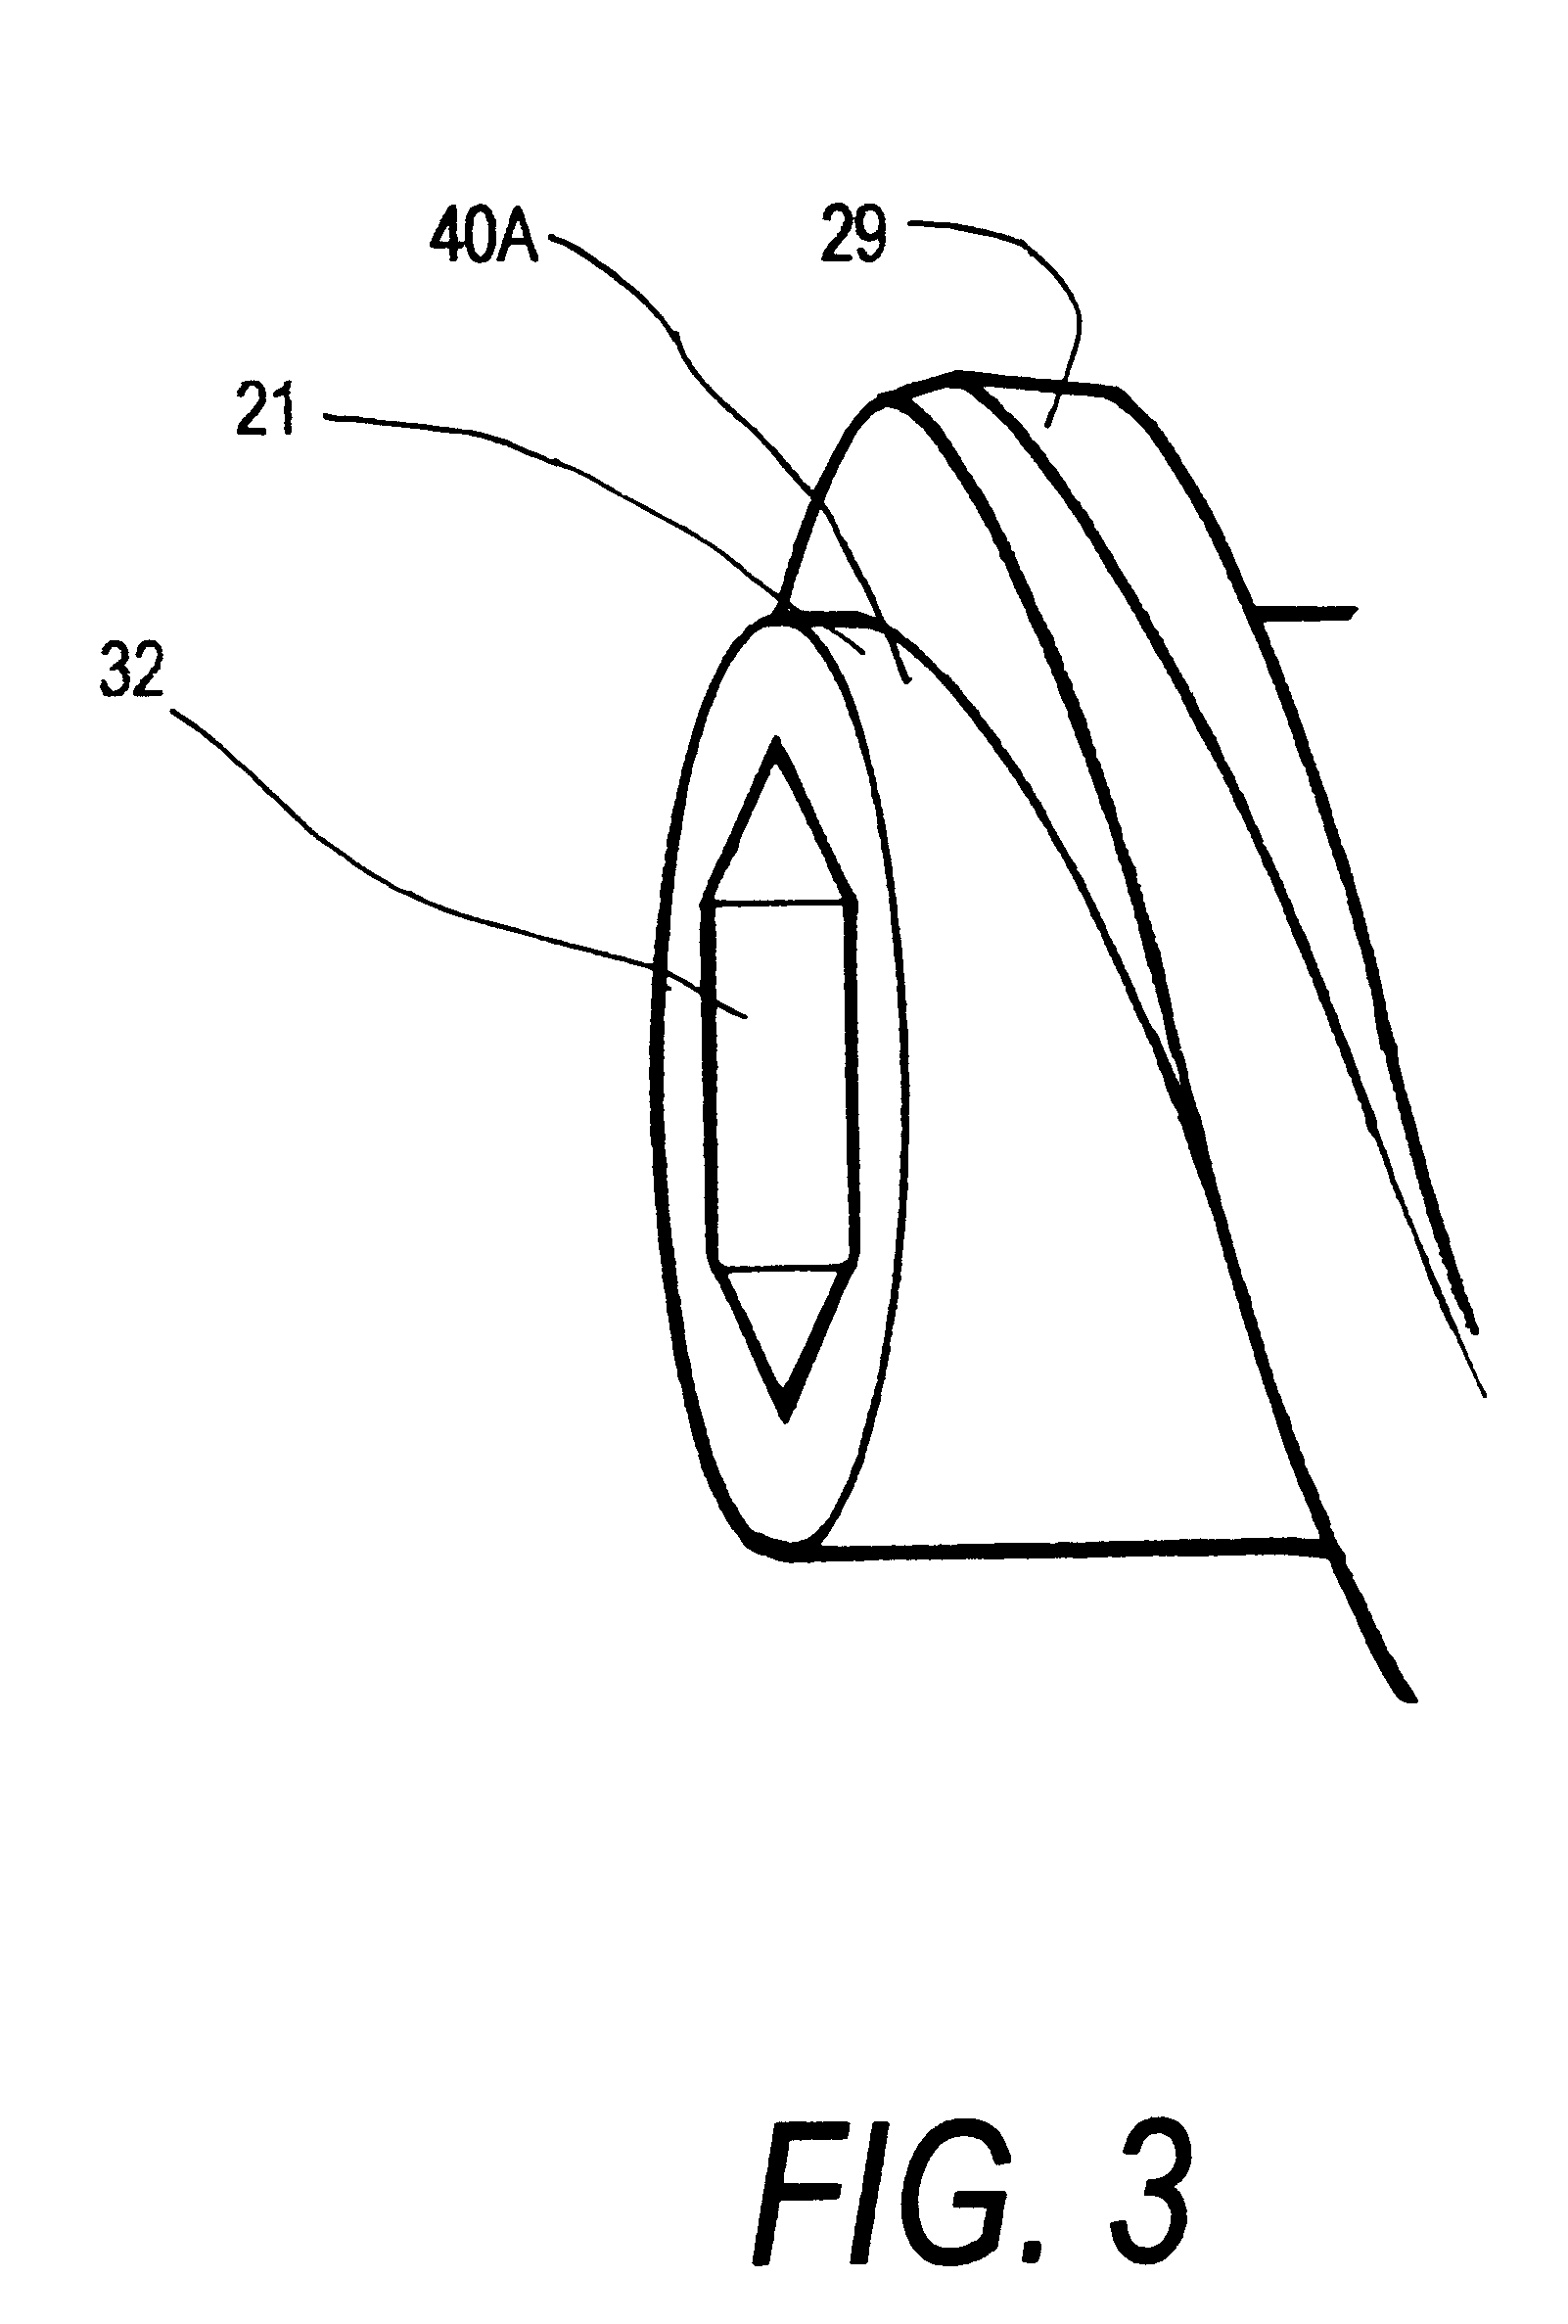 Offset helix surgical fixation screws and methods of use